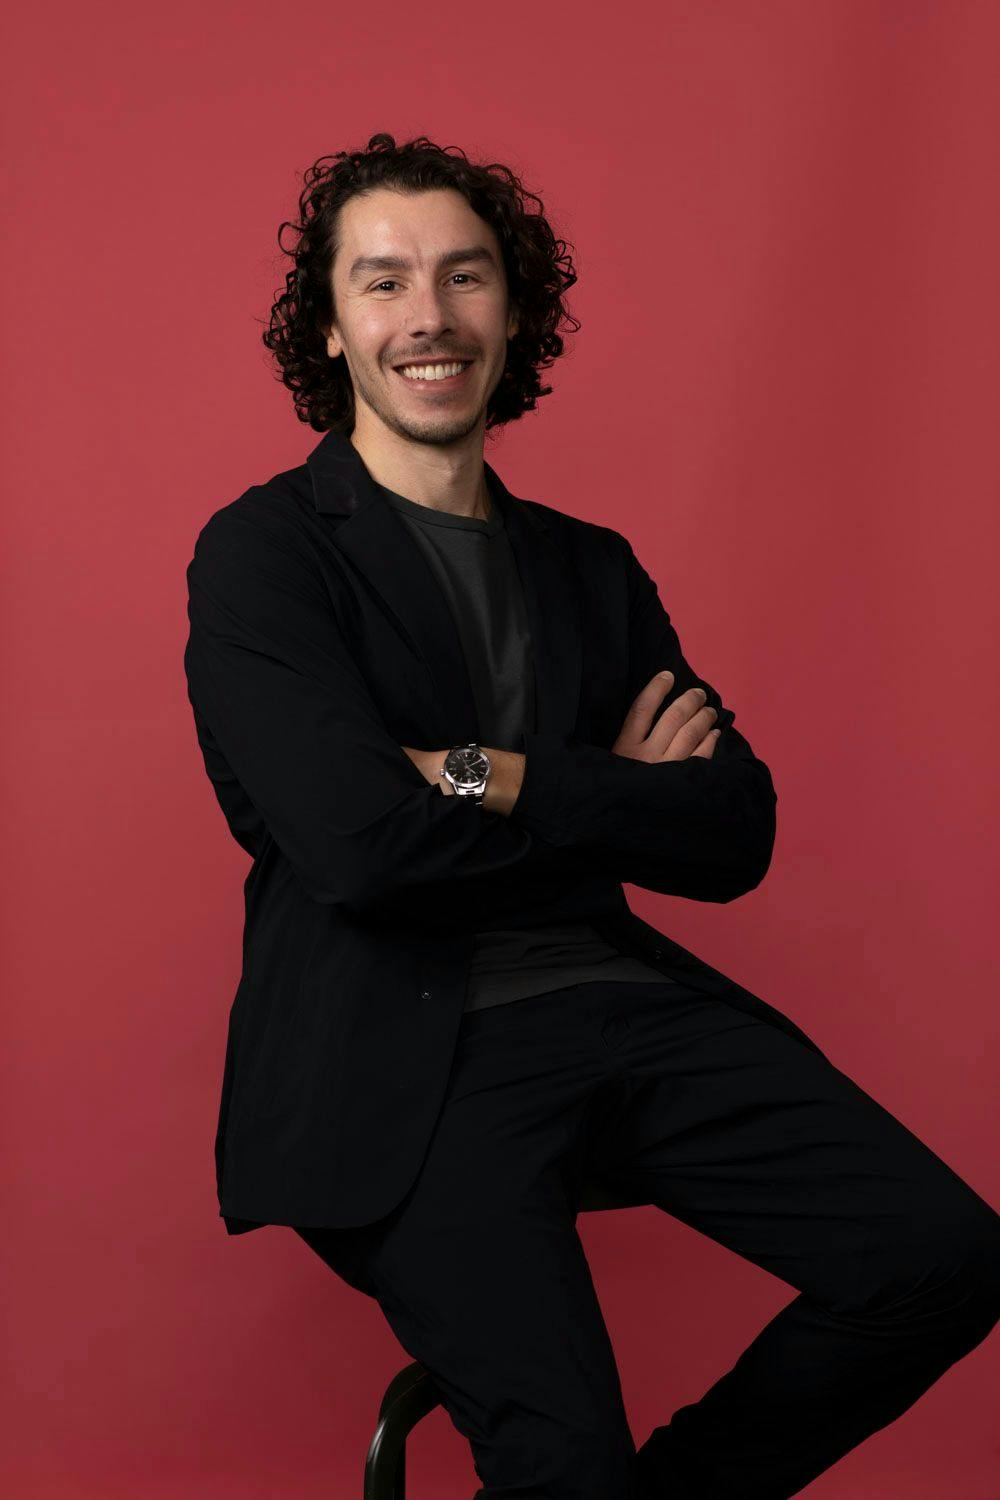 Pablo Ulpiano sitting on a stool against a red backdrop.